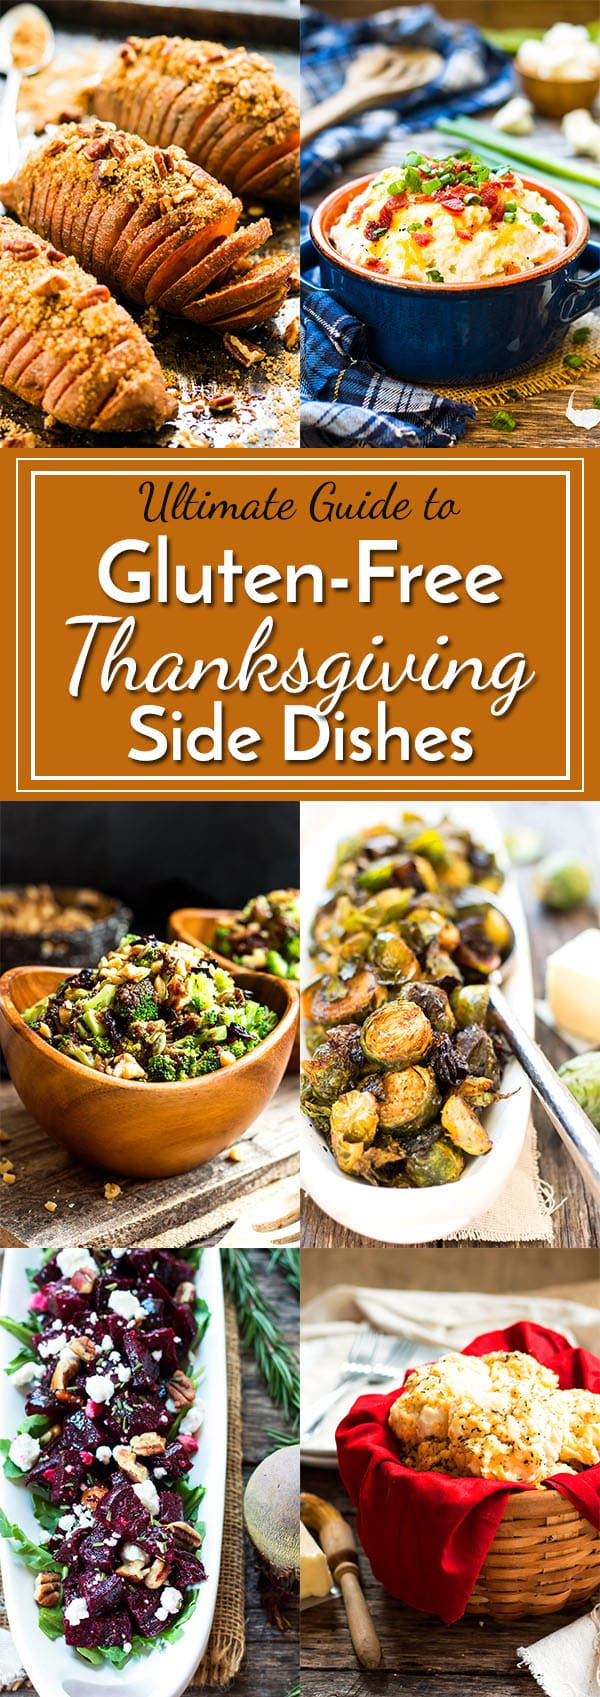 Gluten Free Dairy Free Side Dishes
 The Ultimate Guide to Gluten Free Thanksgiving Side Dishes